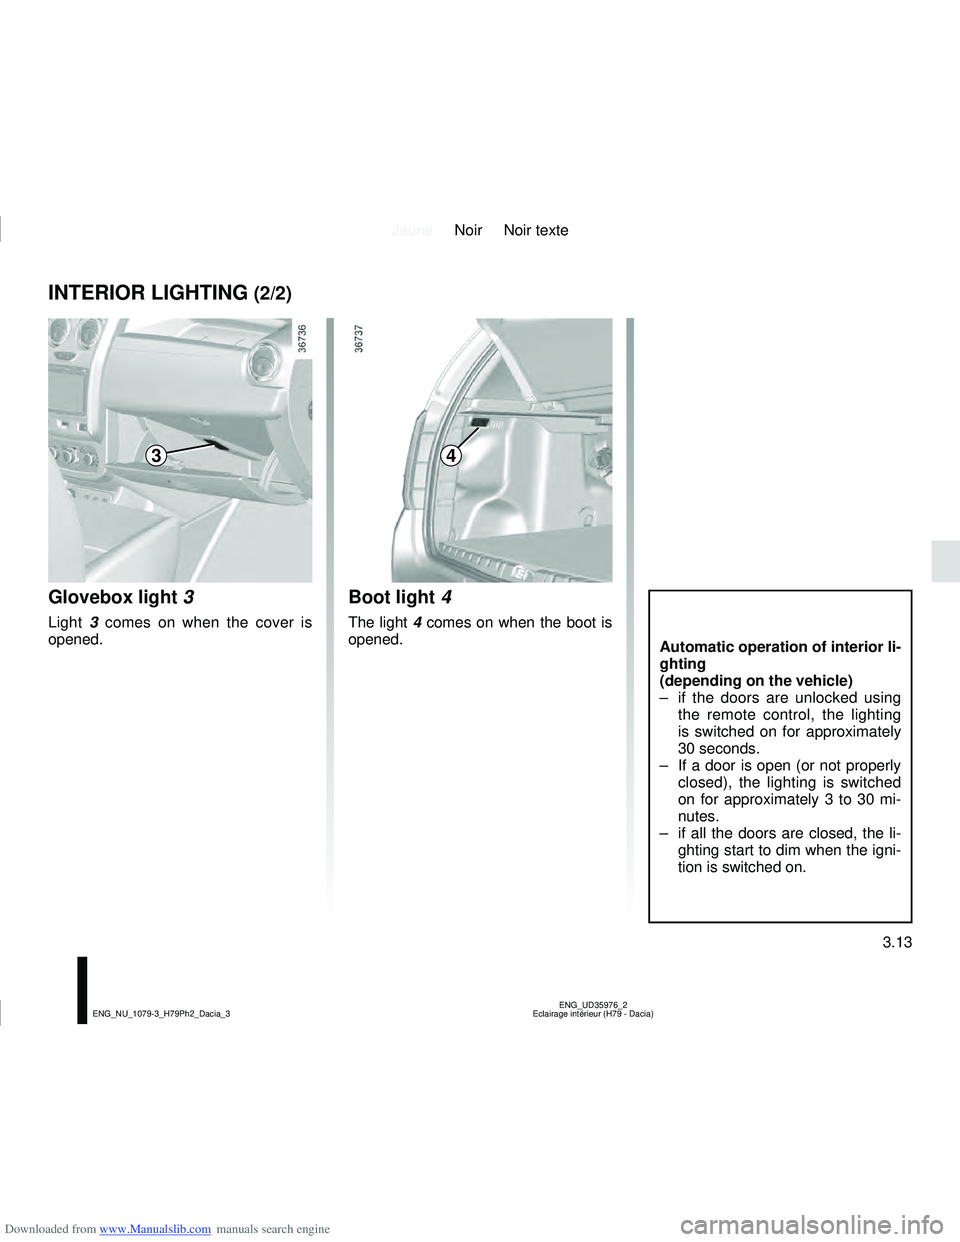 DACIA DUSTER 2021  Owners Manual Downloaded from www.Manualslib.com manuals search engine JauneNoir Noir texte
3.13
ENG_UD35976_2
Eclairage intérieur (H79 - Dacia)
ENG_NU_1079-3_H79Ph2_Dacia_3
INTERIOR LIGHTING (2/2)
Automatic opera